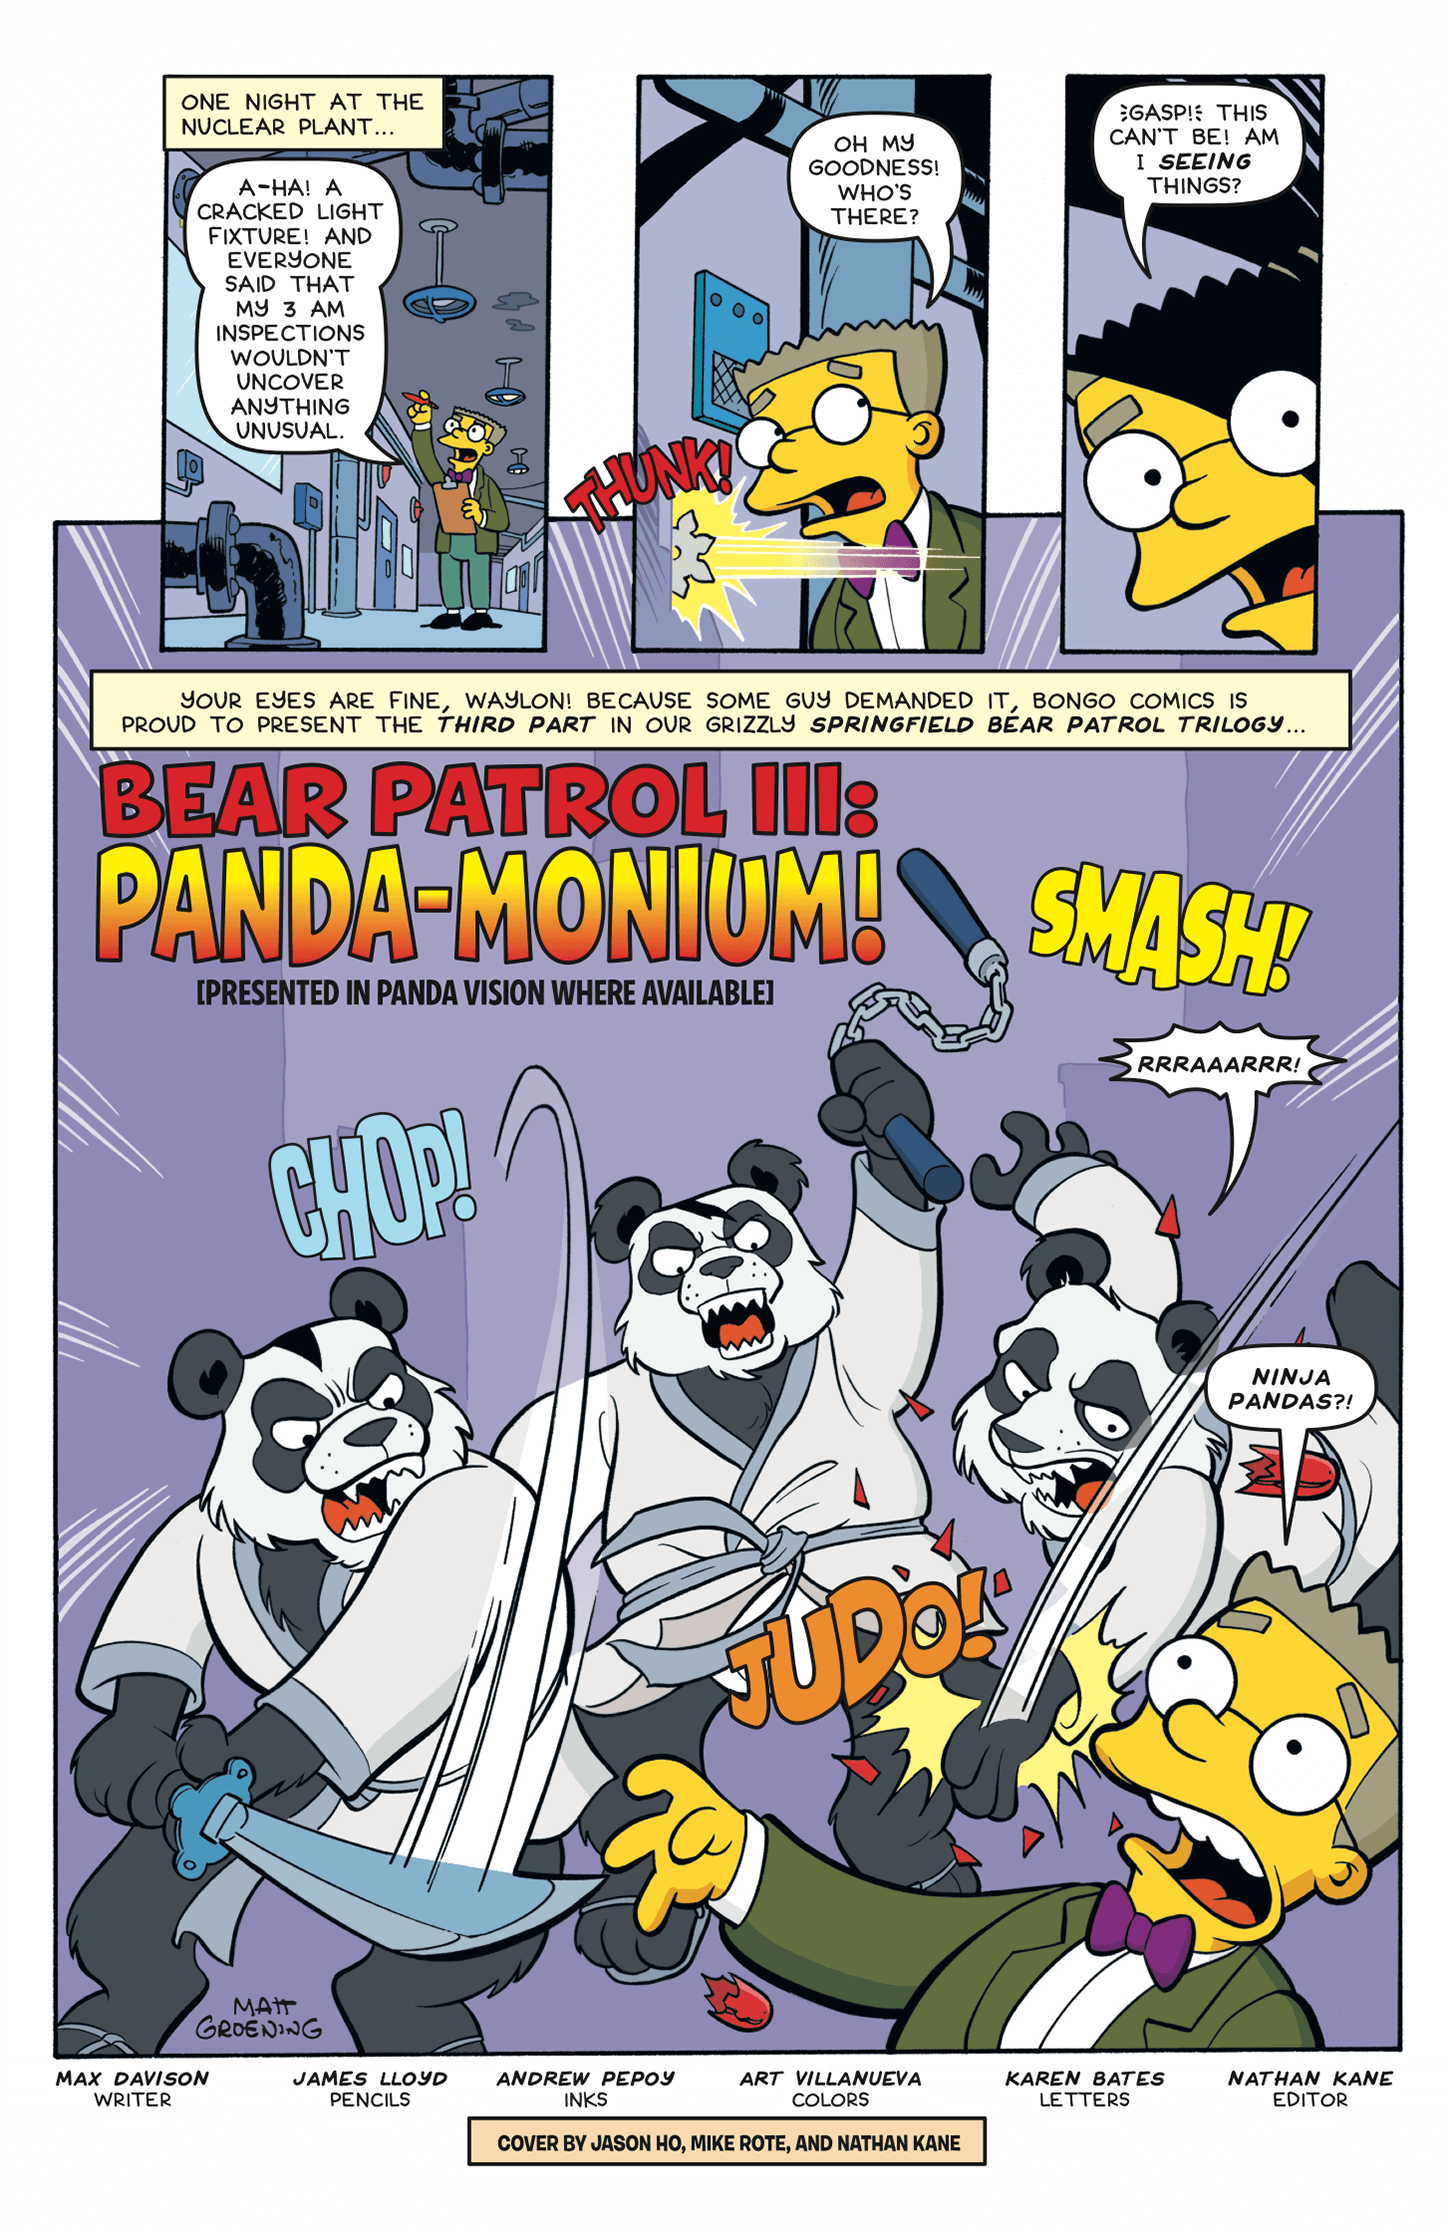 Simpsons Comics (1993-): Chapter 236 - Page 2